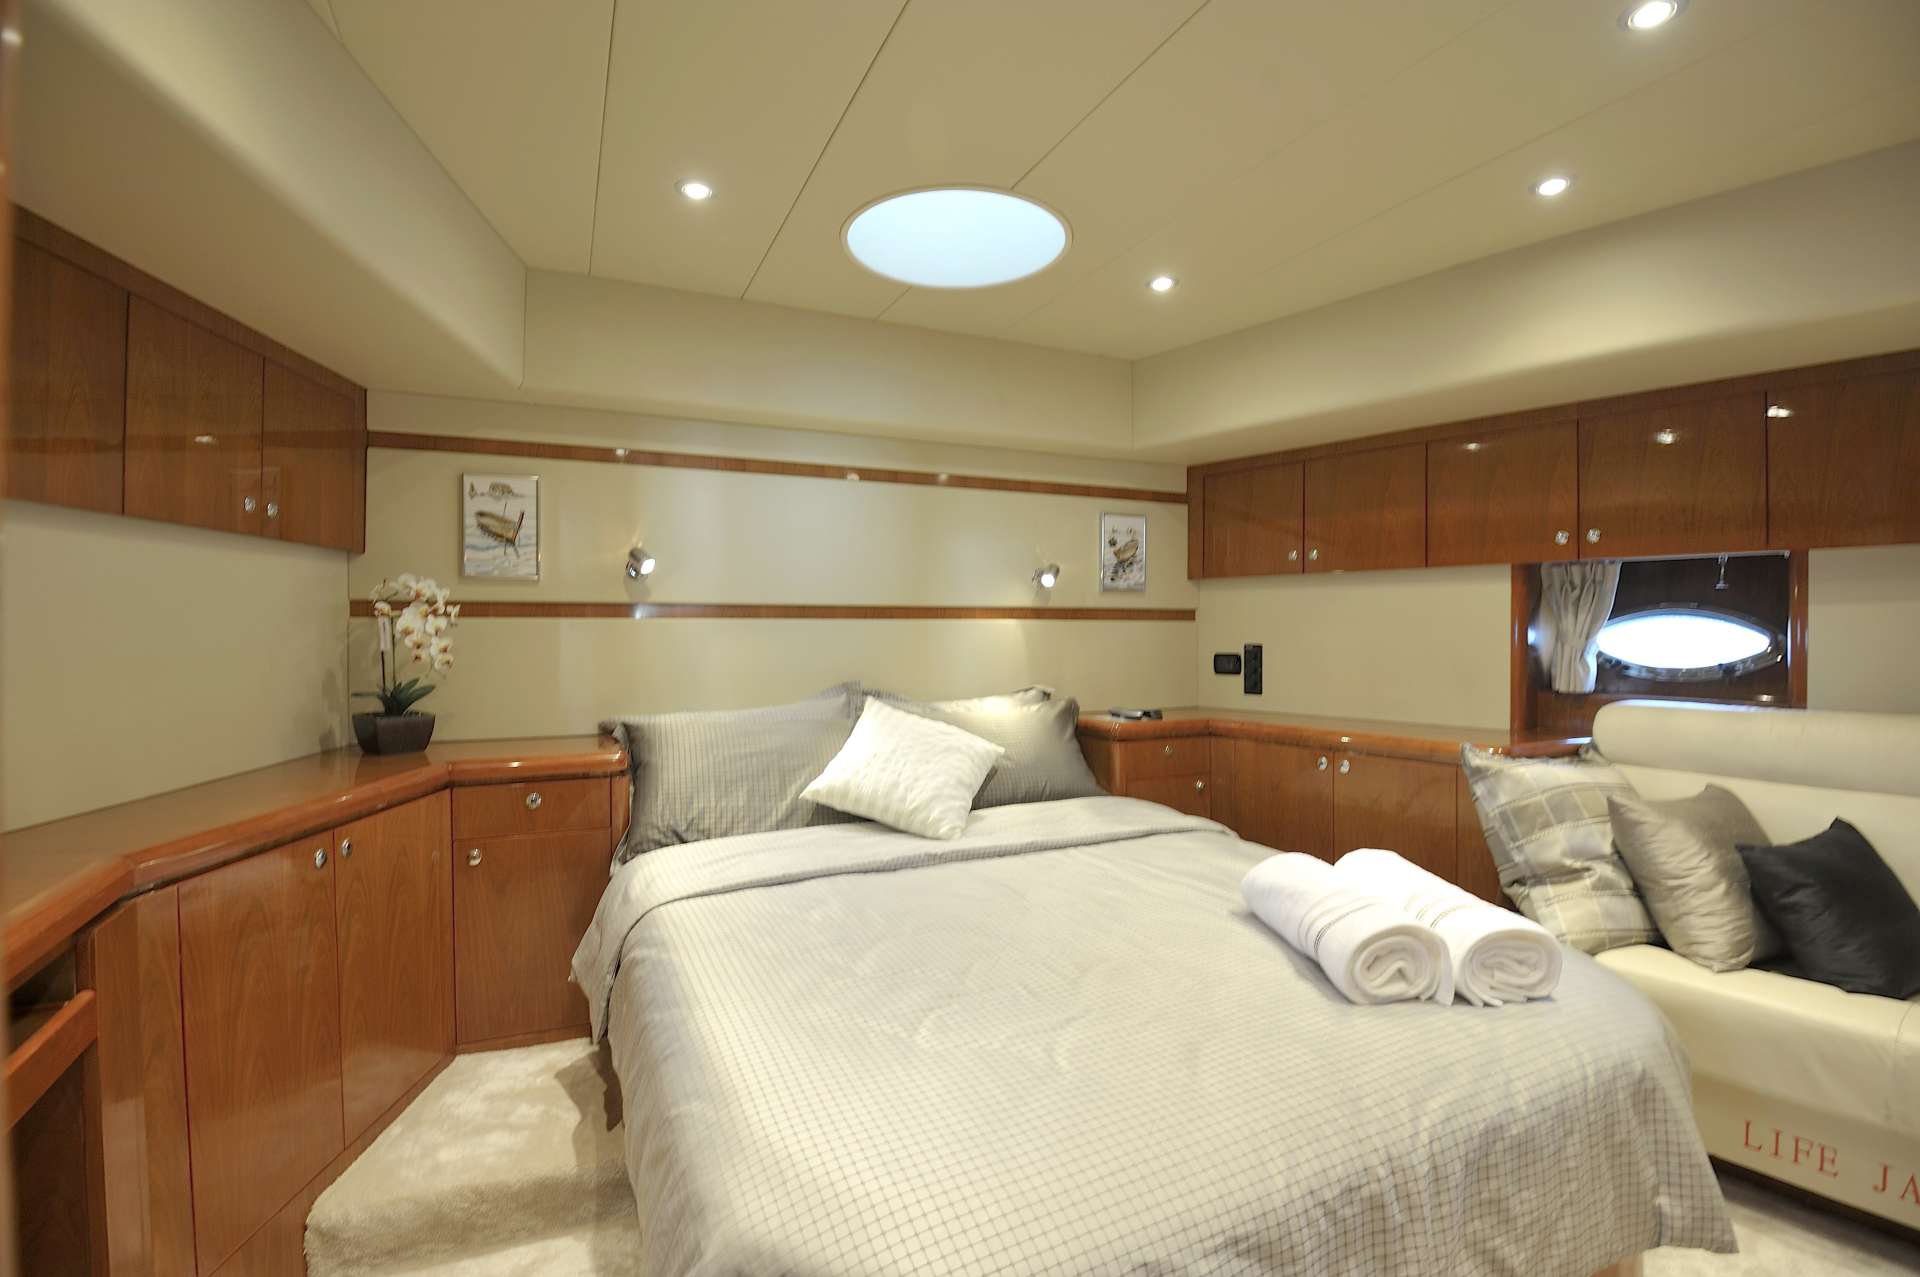 lady kathryn - Yacht Charter Koh Samui & Boat hire in SE Asia 6